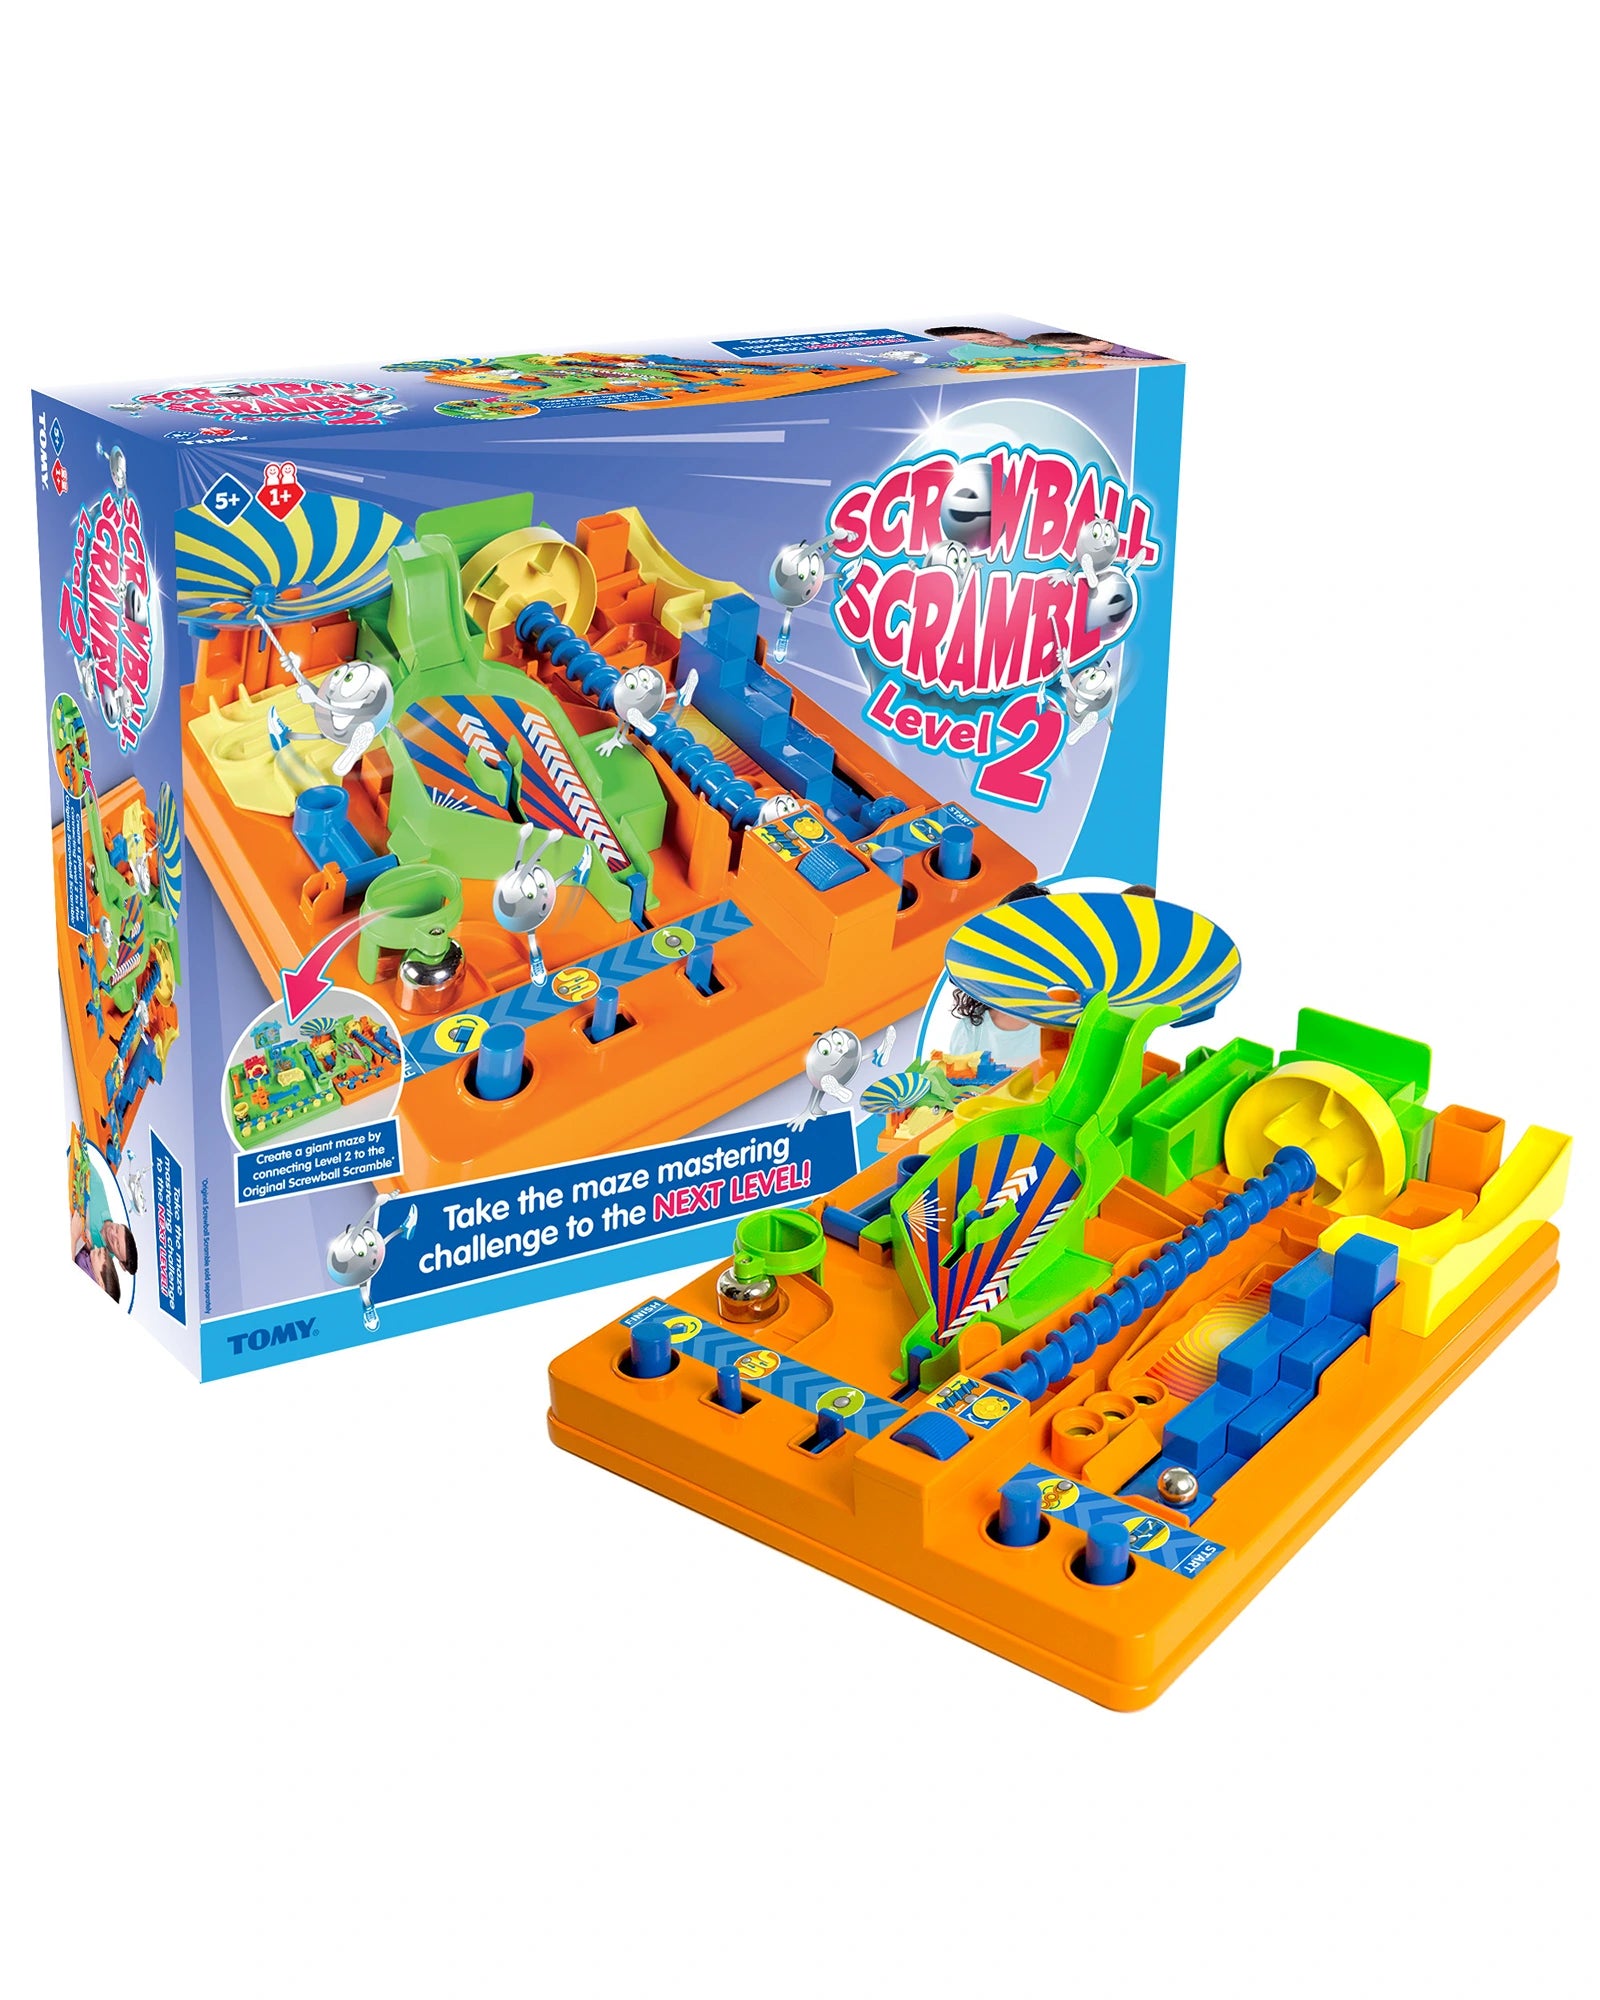 Screwball Scramble - Best Brainteasers for Ages 5 to 10